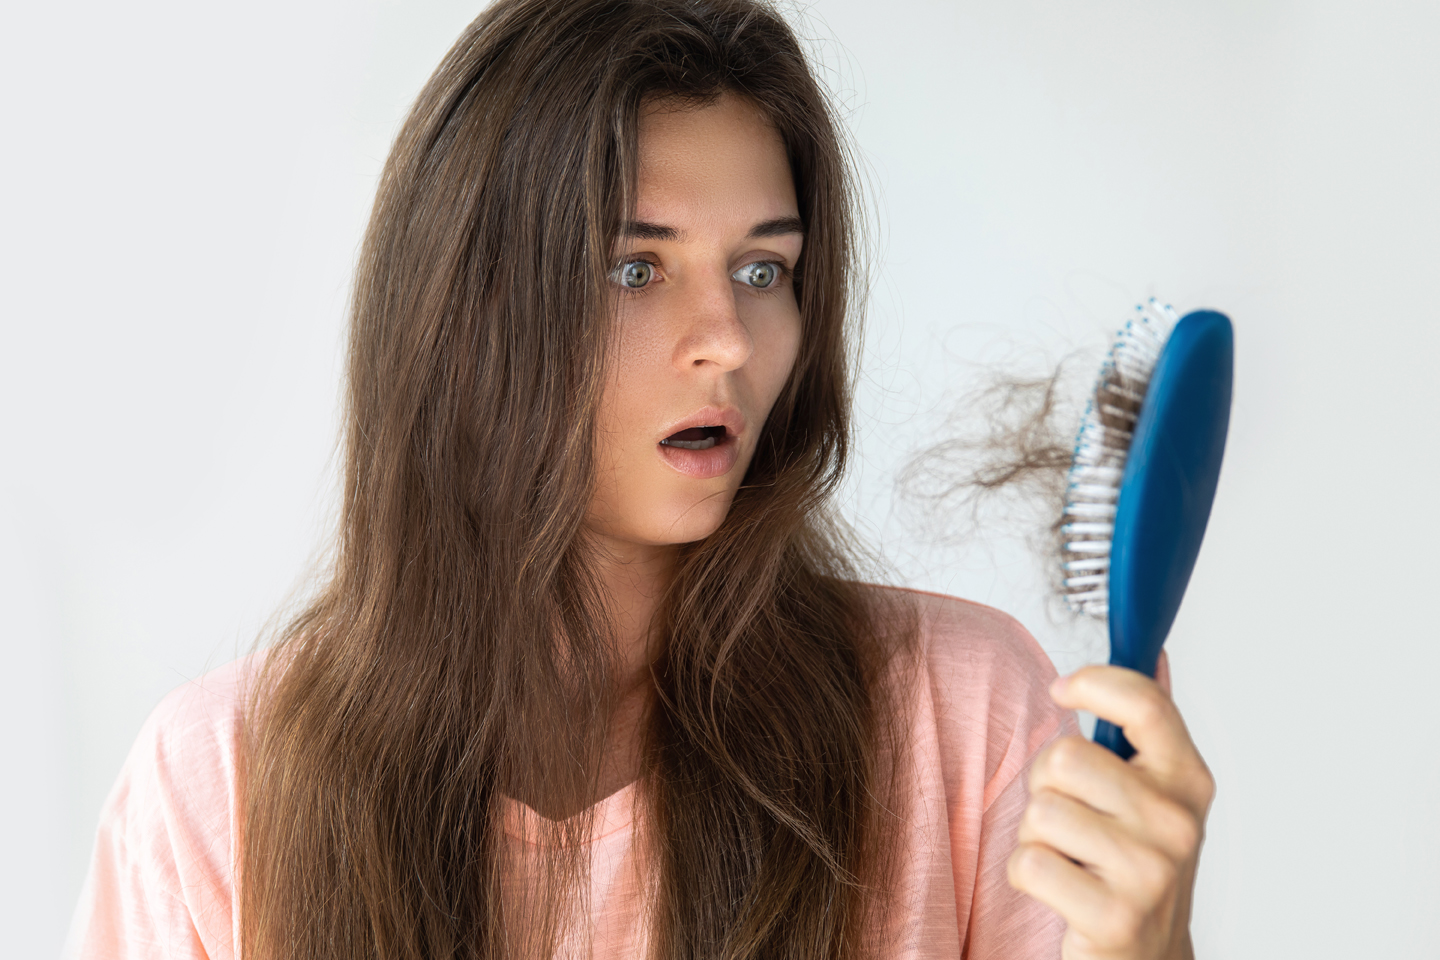 Excess Hair Growth or Loss due to PCOS